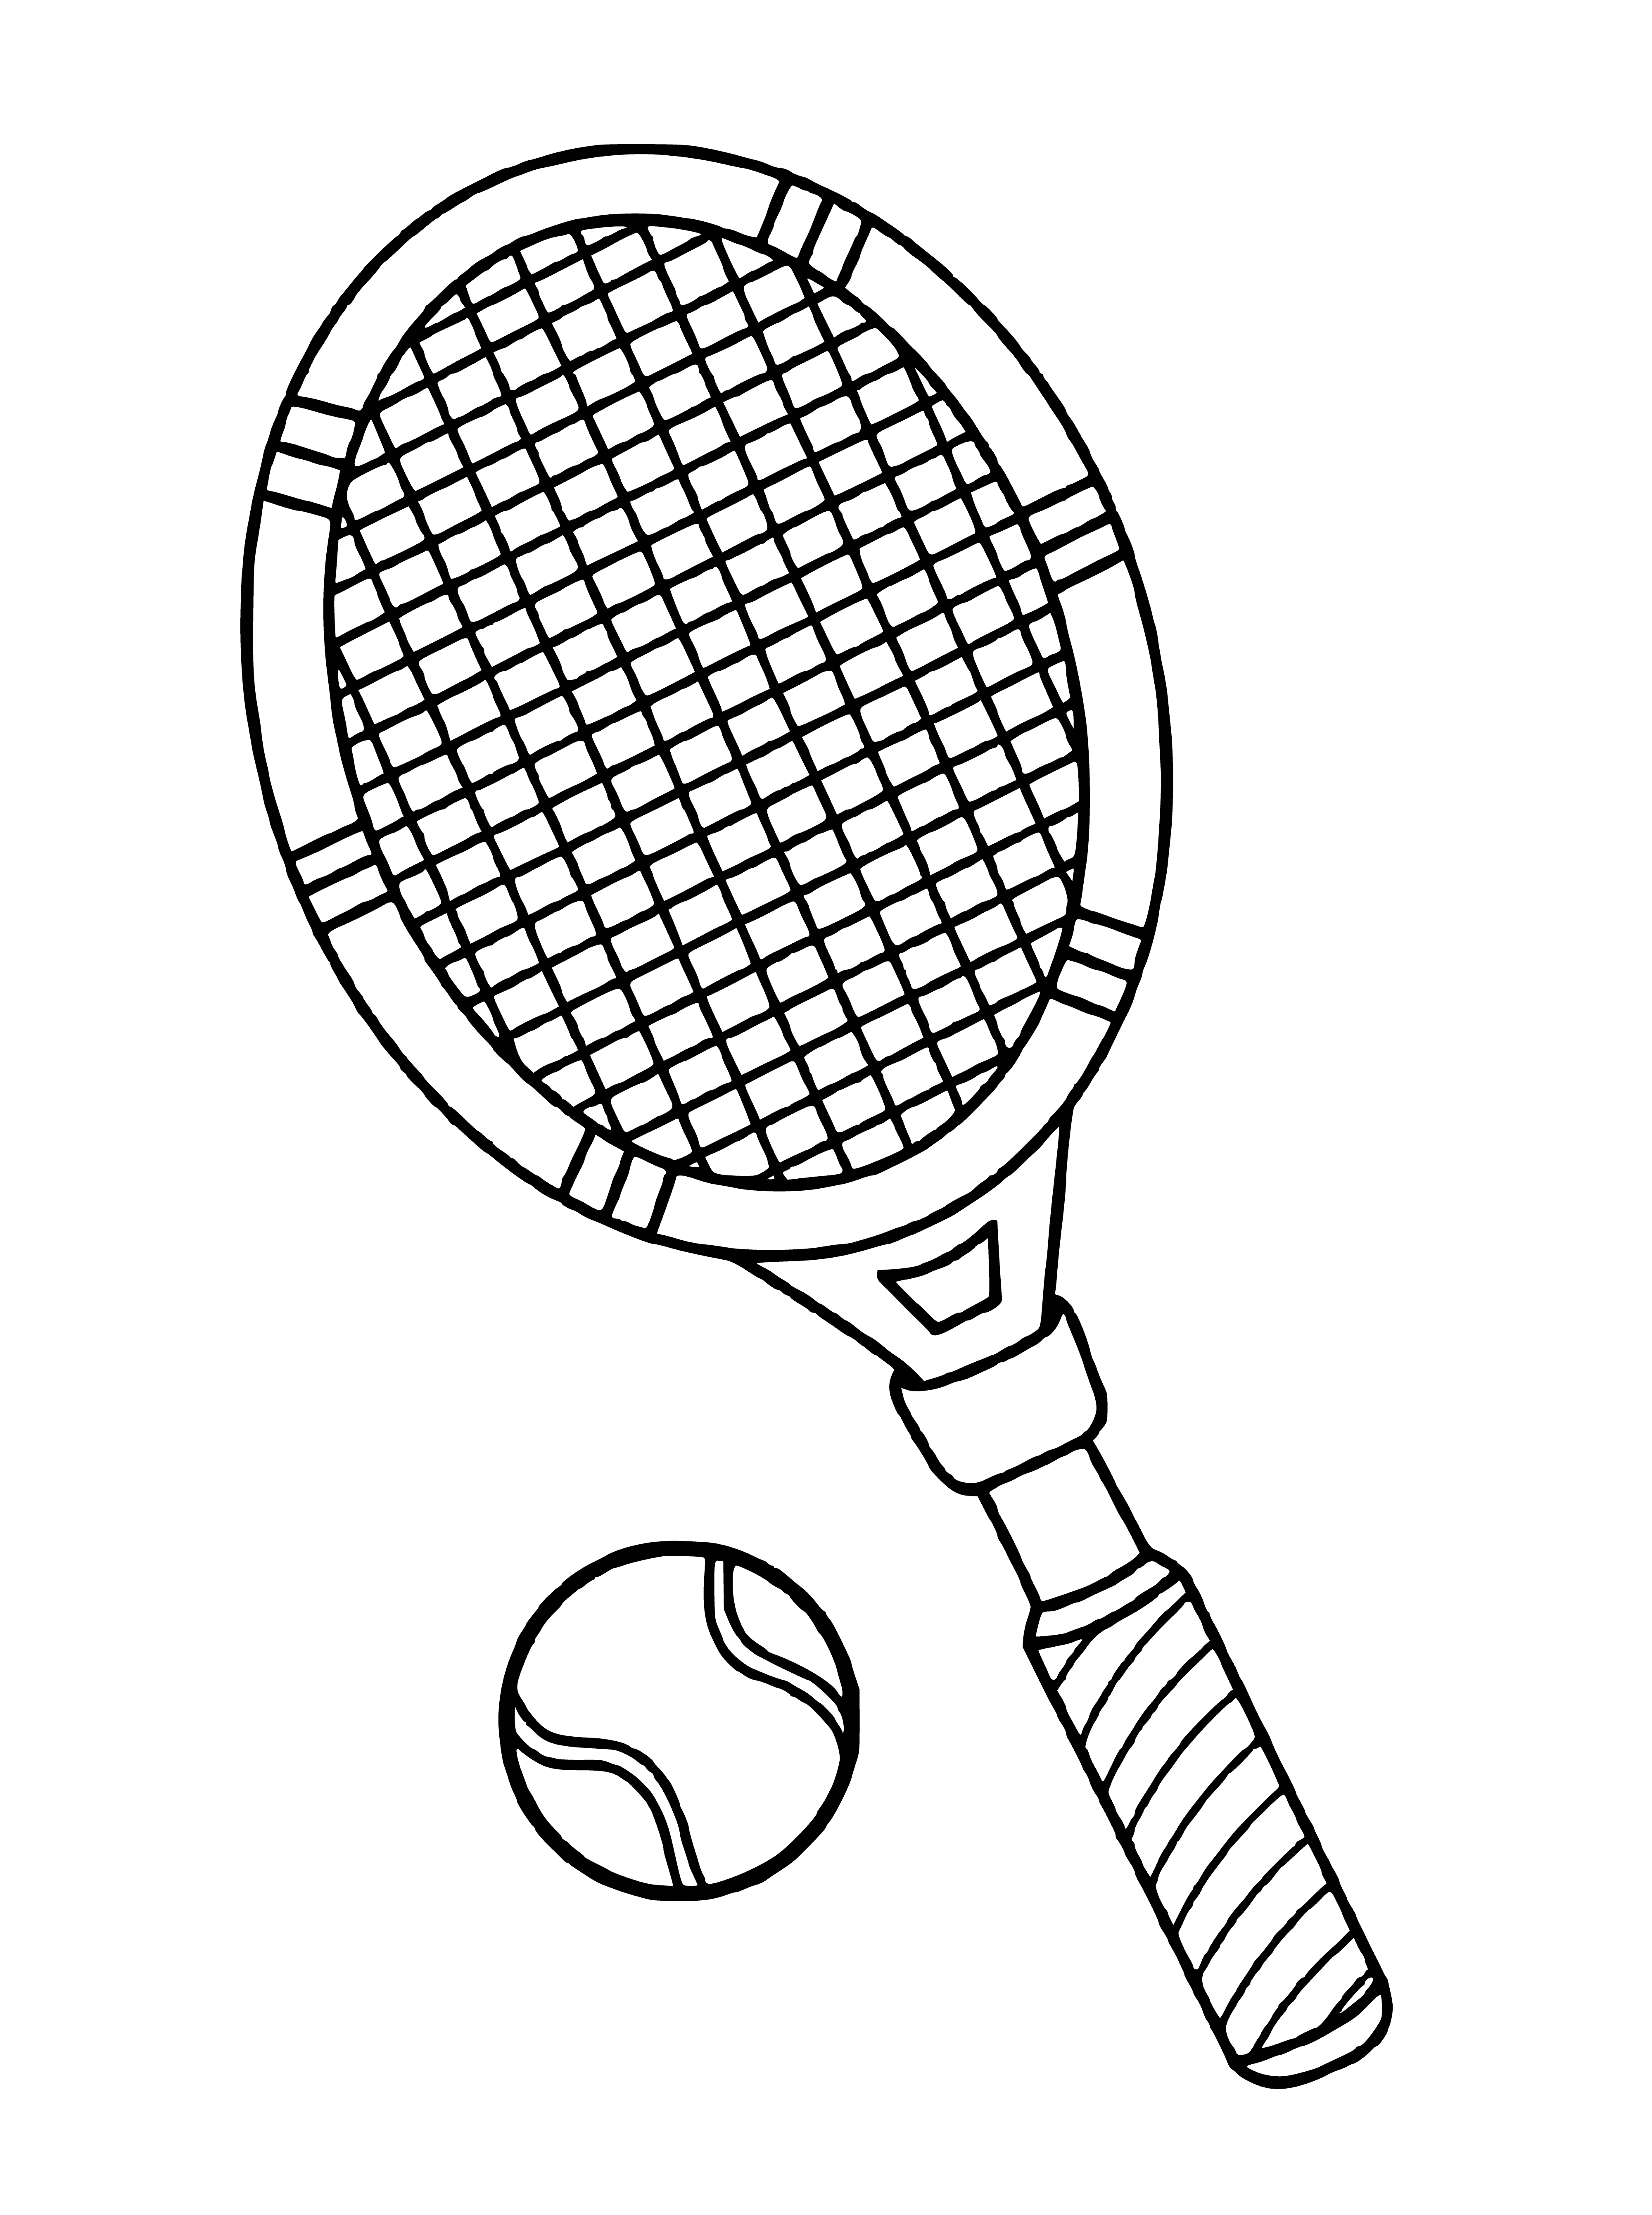 Tennis racket and tennis ball coloring page